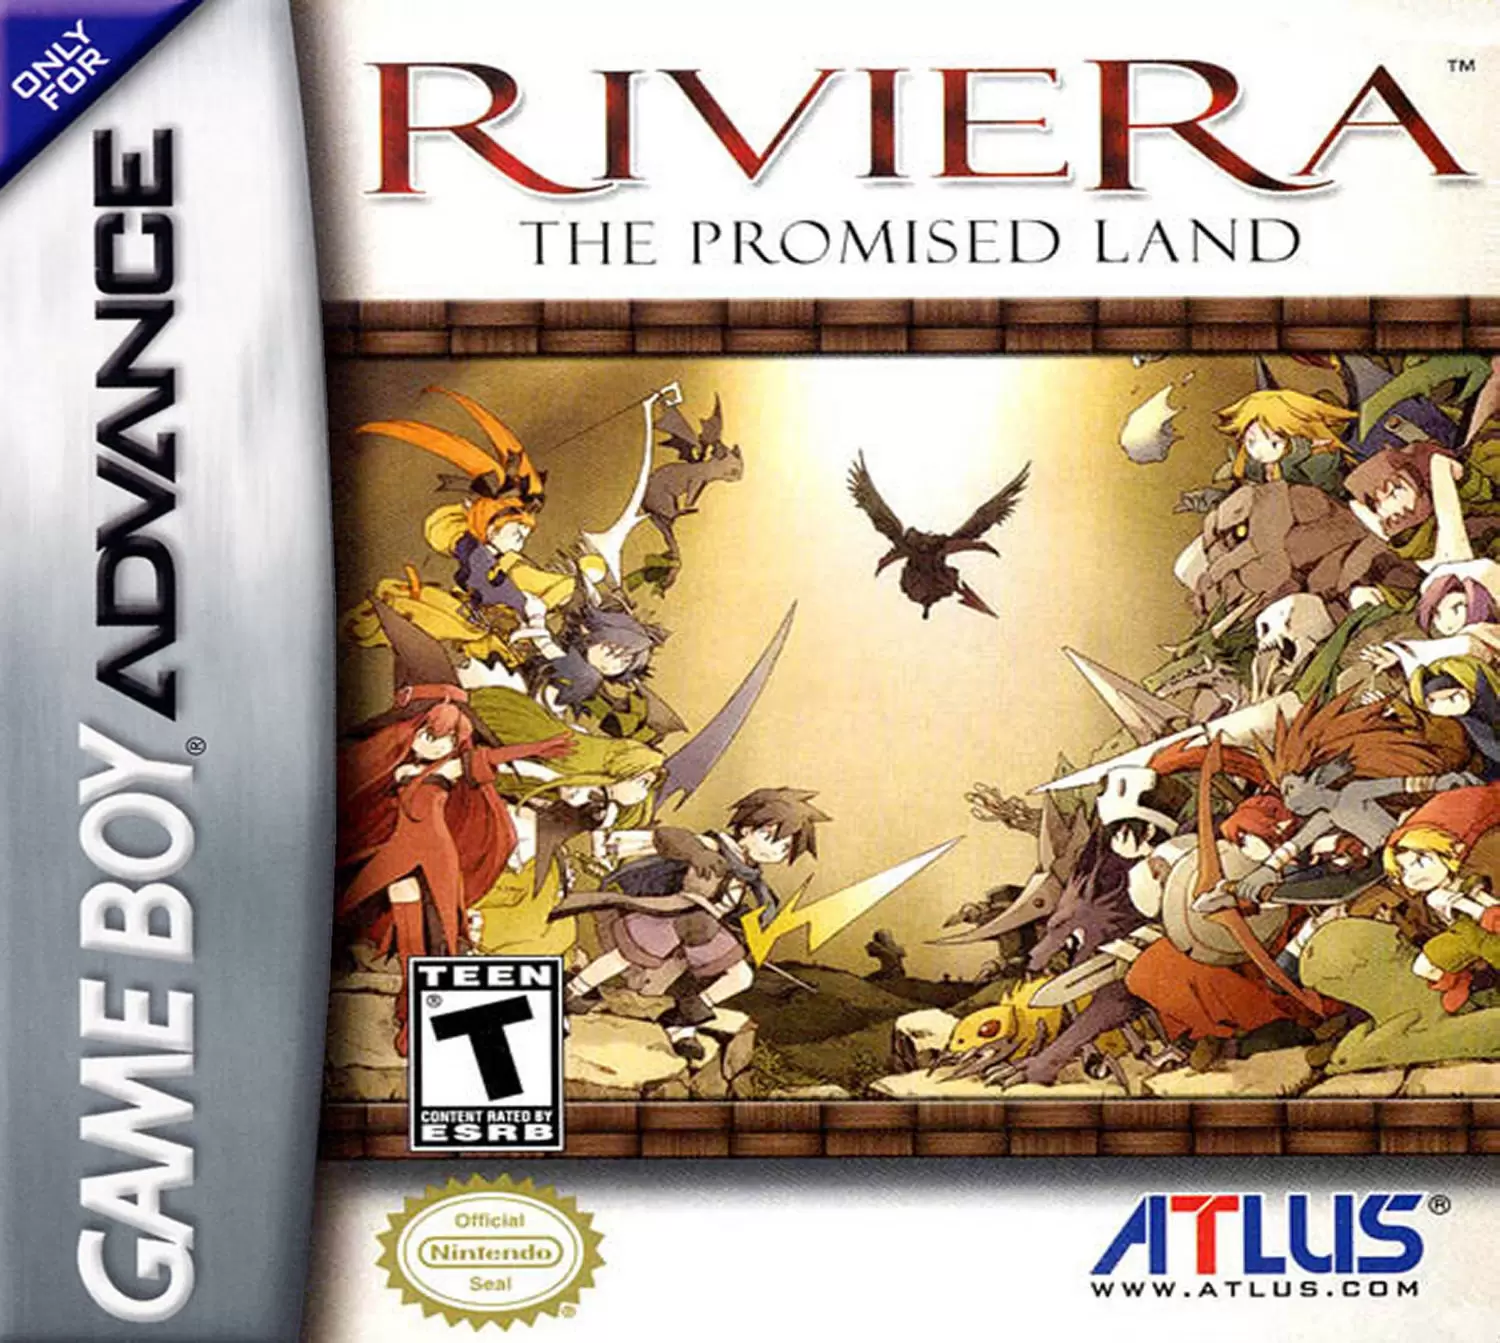 Game Boy Advance Games - Riviera: The Promised Land